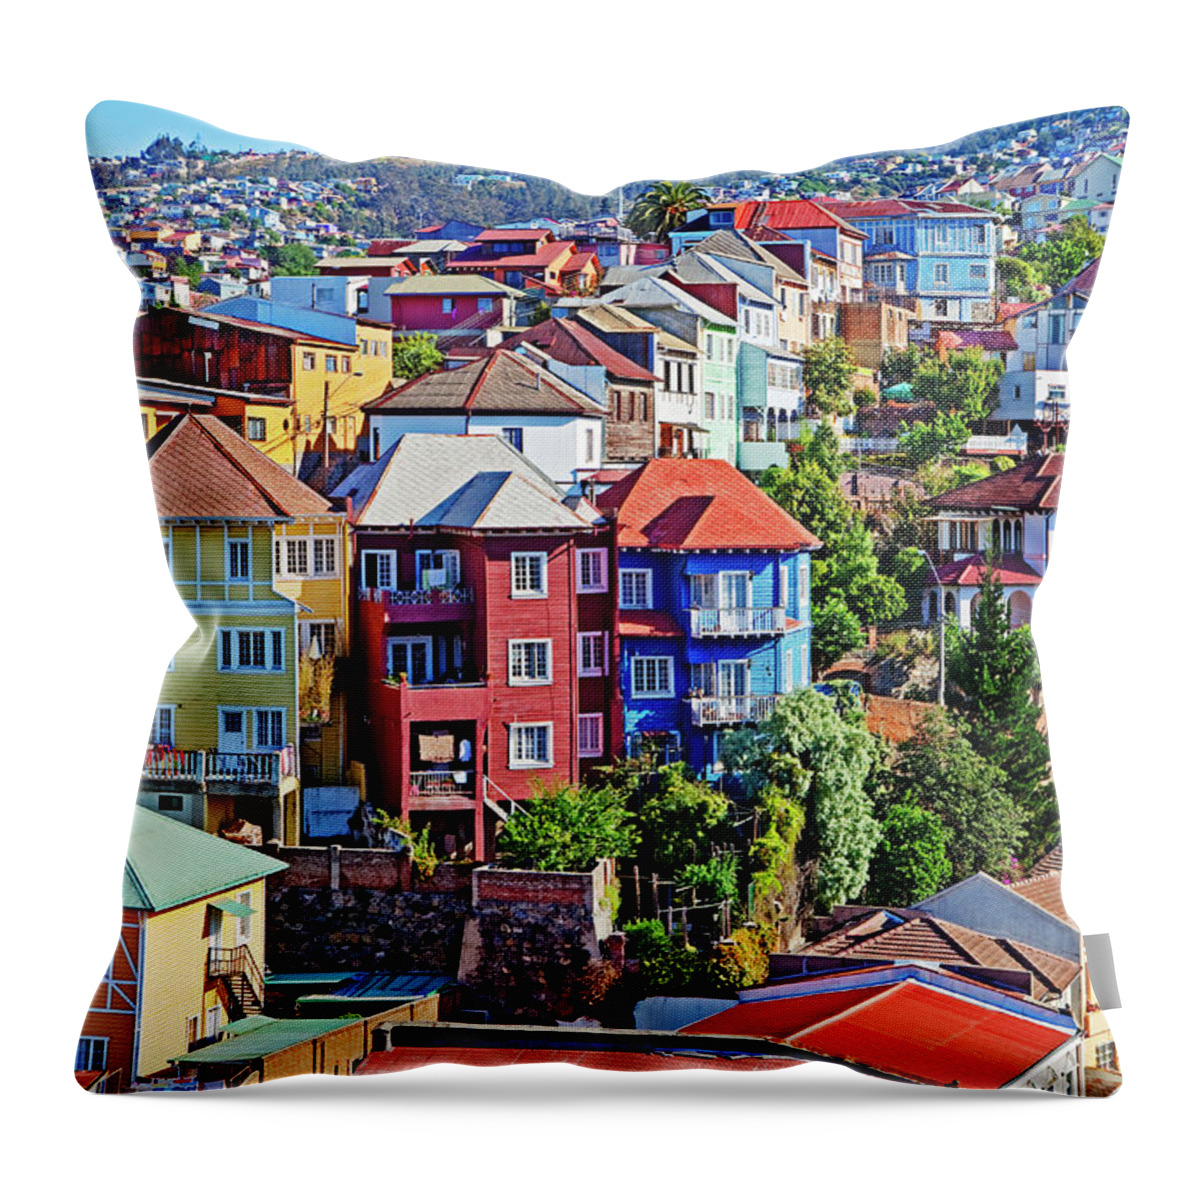 Scenics Throw Pillow featuring the photograph Colorful Buildings, Vailparaso, Chile by John W Banagan